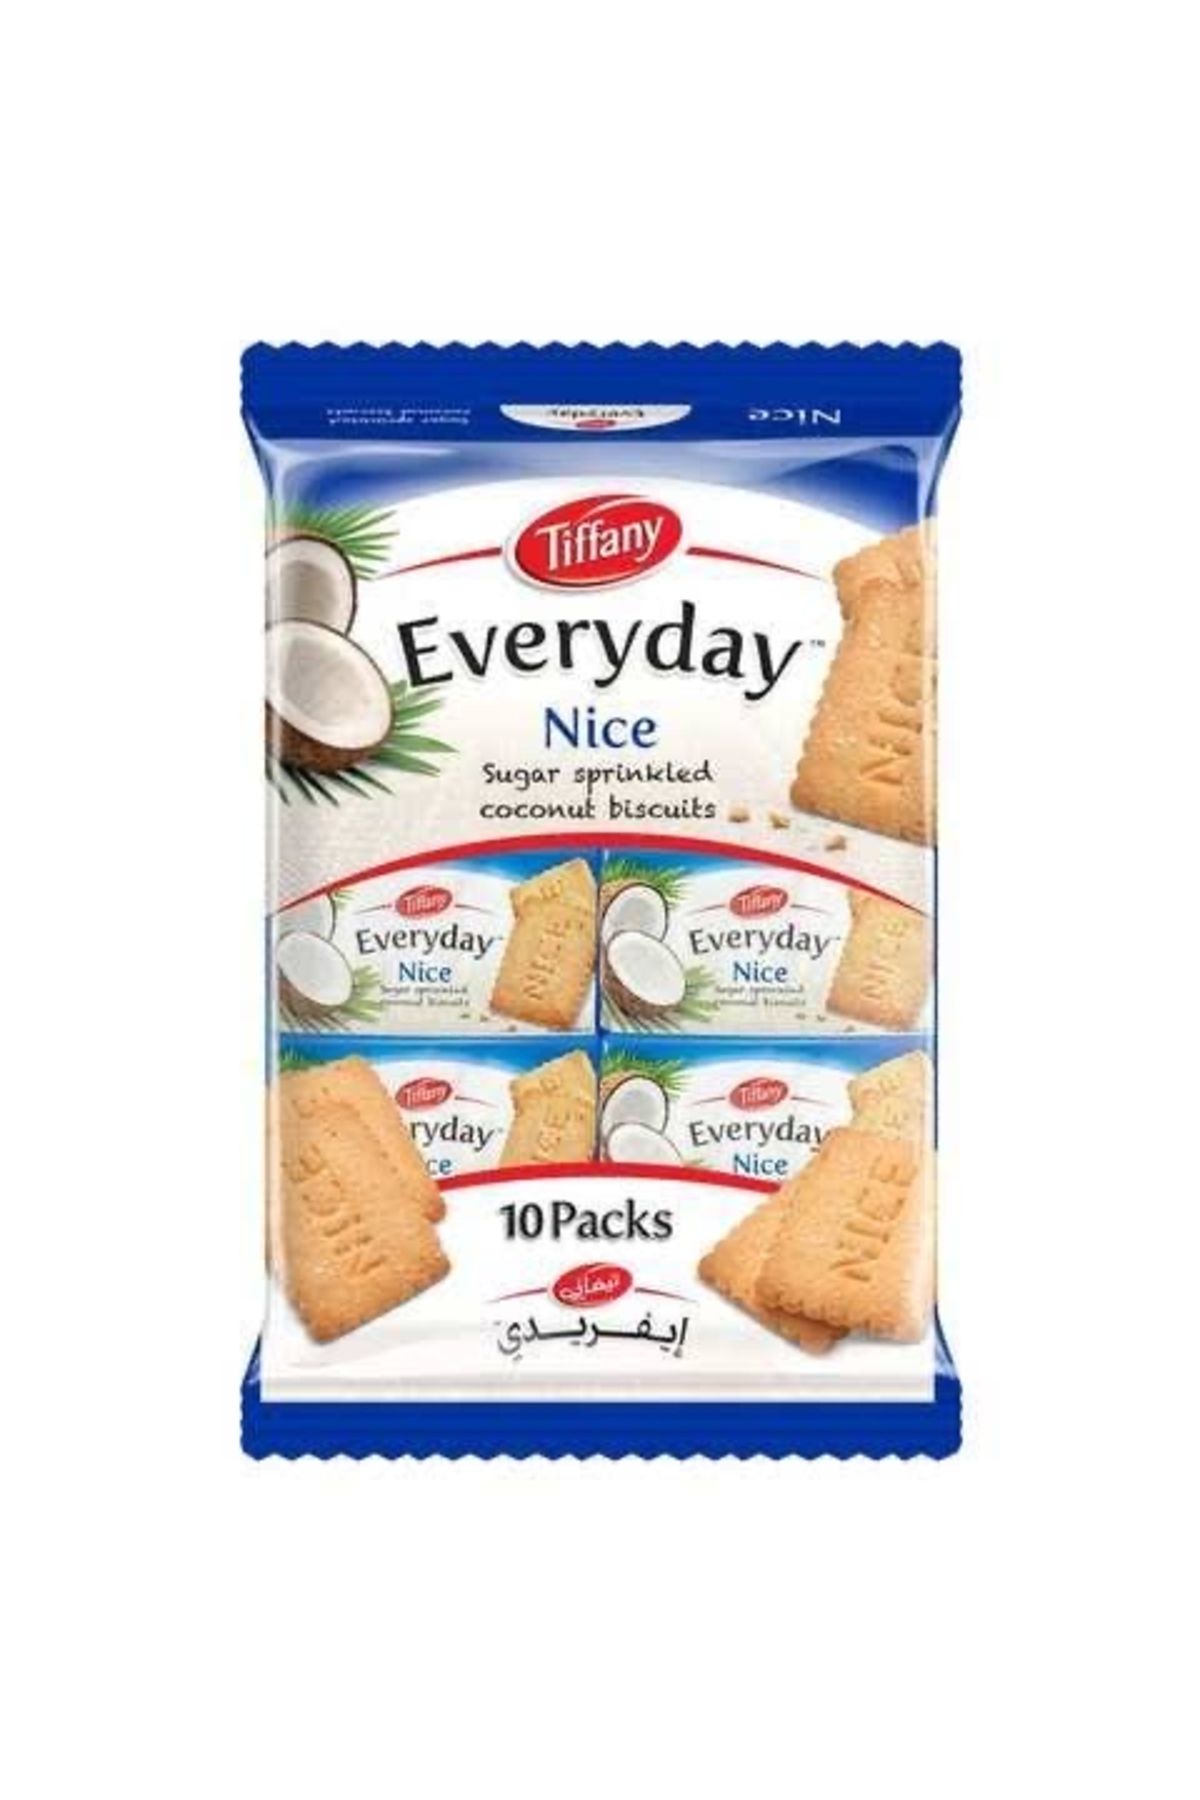 Tiffany Everyday Nice Biscuits 10x40 G